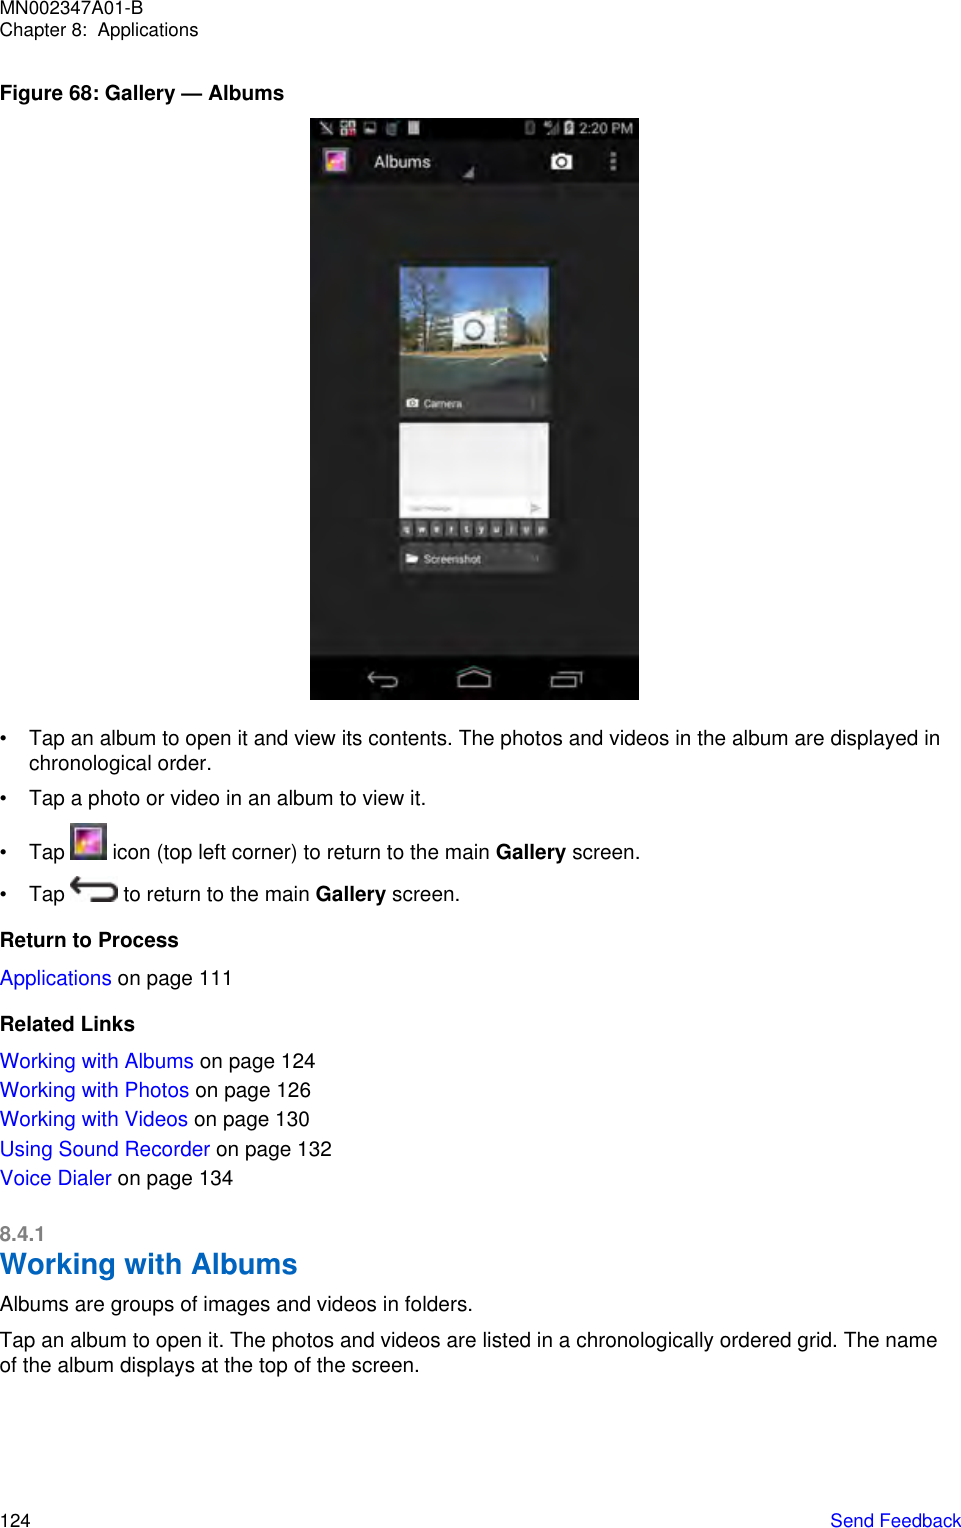 Figure 68: Gallery — Albums• Tap an album to open it and view its contents. The photos and videos in the album are displayed inchronological order.• Tap a photo or video in an album to view it.• Tap   icon (top left corner) to return to the main Gallery screen.• Tap   to return to the main Gallery screen.Return to ProcessApplications on page 111Related LinksWorking with Albums on page 124Working with Photos on page 126Working with Videos on page 130Using Sound Recorder on page 132Voice Dialer on page 1348.4.1Working with AlbumsAlbums are groups of images and videos in folders.Tap an album to open it. The photos and videos are listed in a chronologically ordered grid. The nameof the album displays at the top of the screen.MN002347A01-BChapter 8:  Applications124   Send Feedback